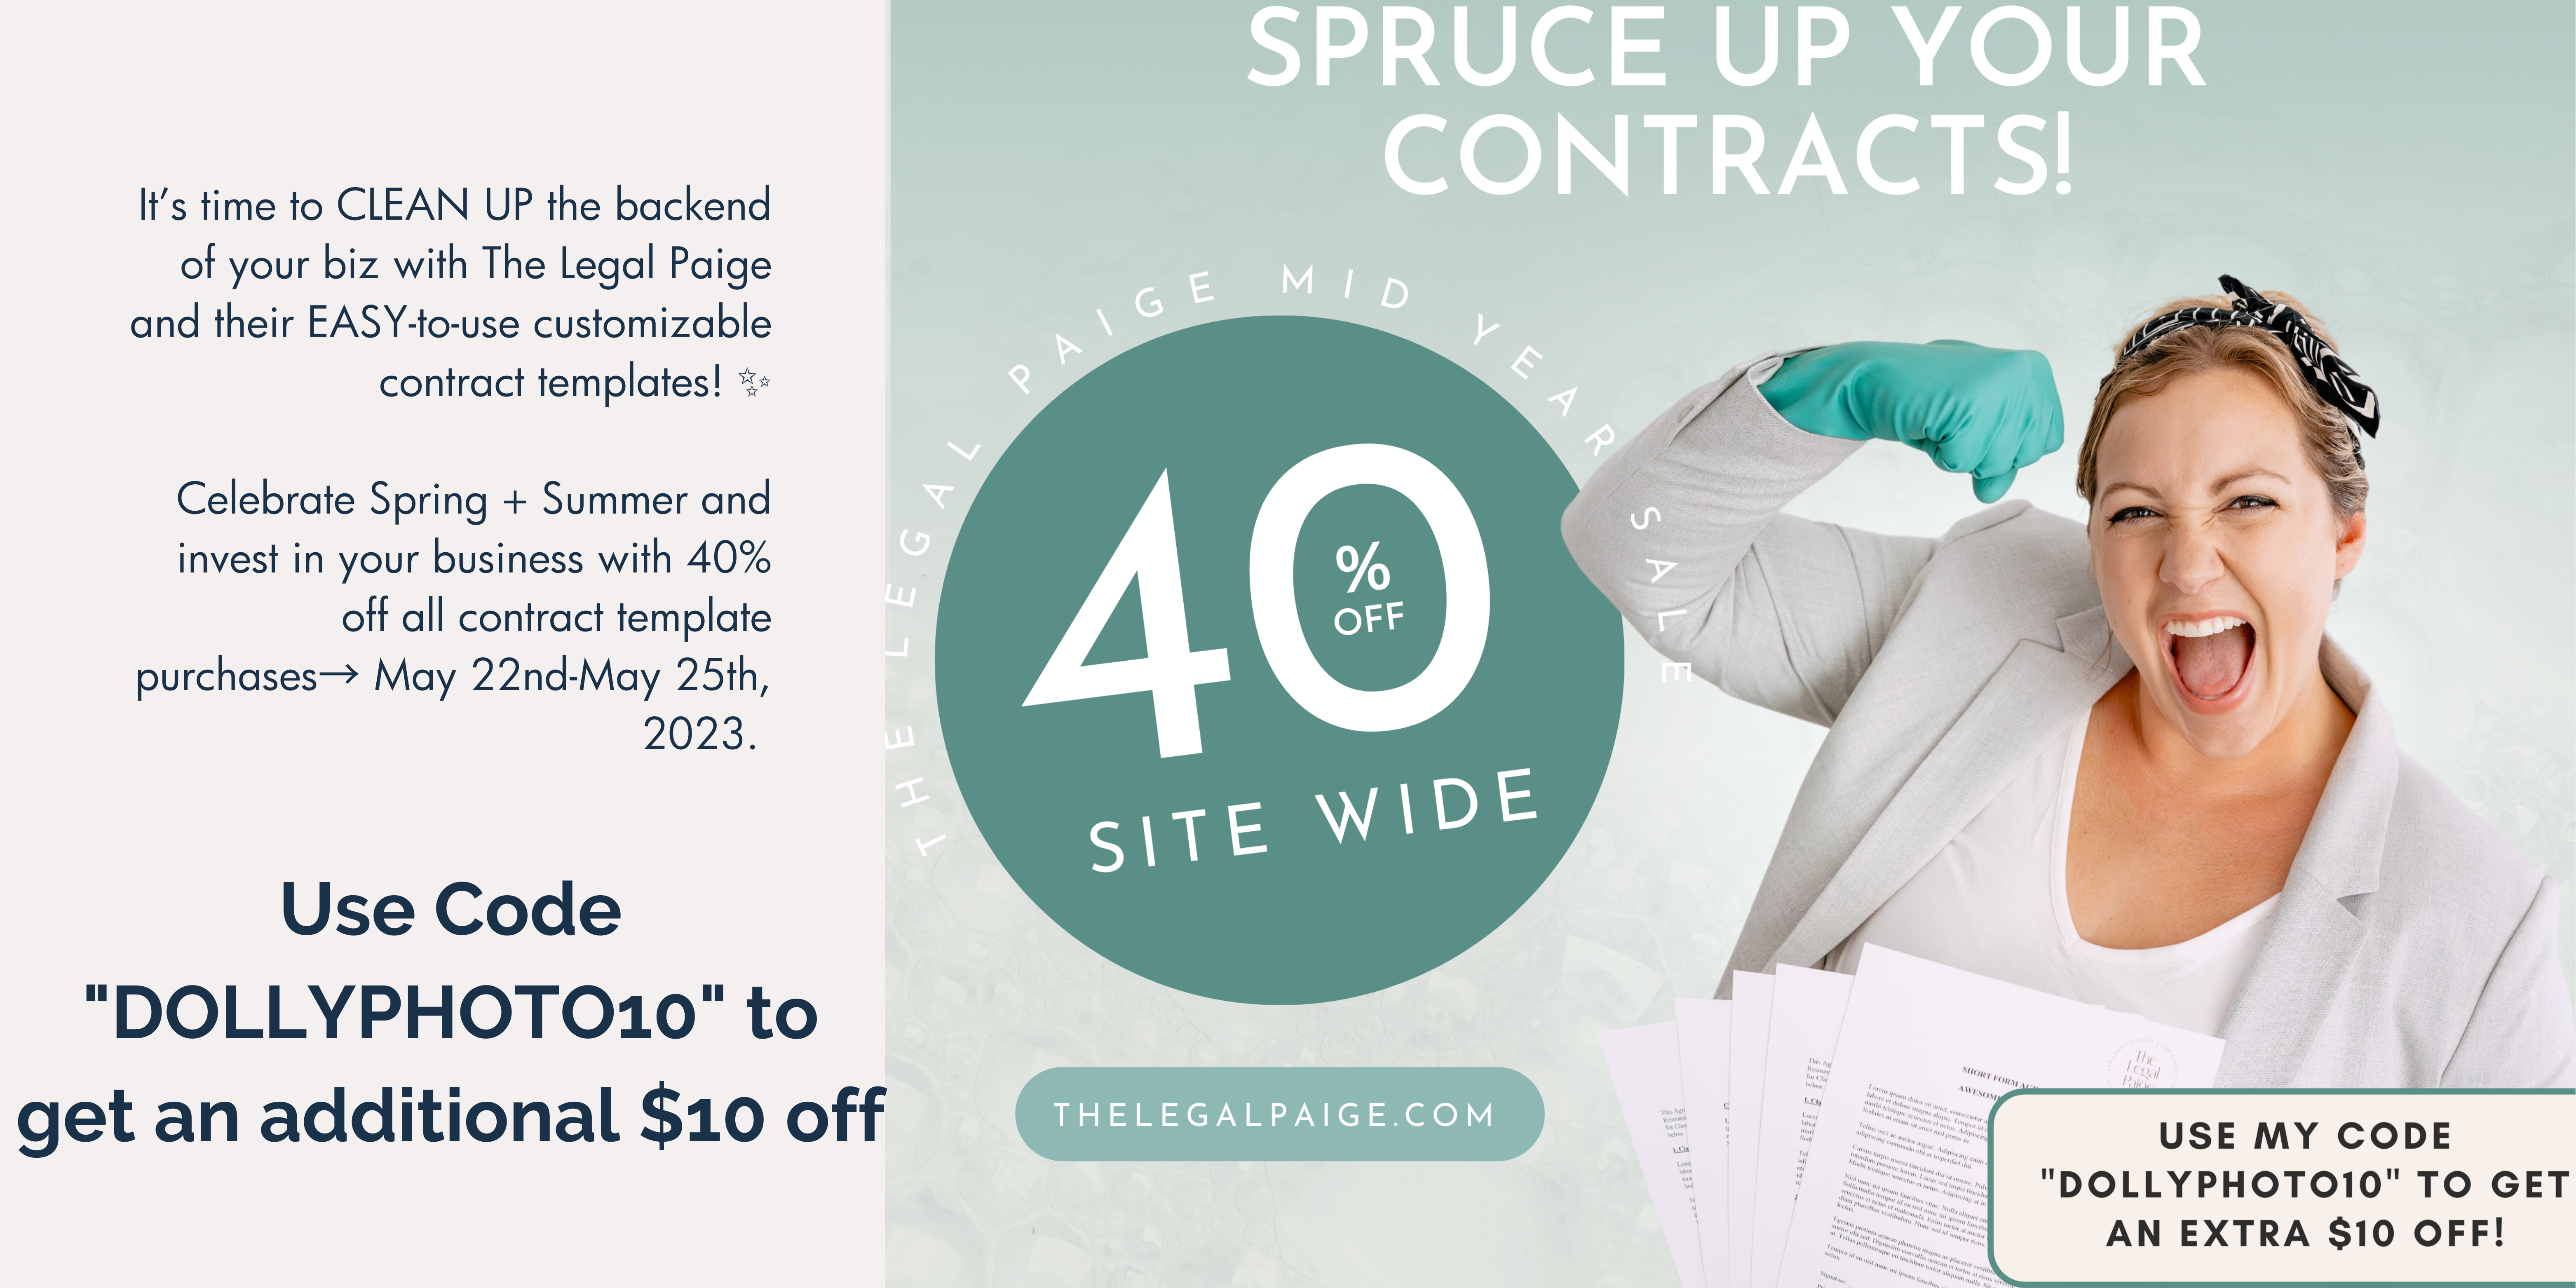 spring_clean_the_backend_of_your_business_with_the_legal_Paige_contract_shop_40%_off_contracts